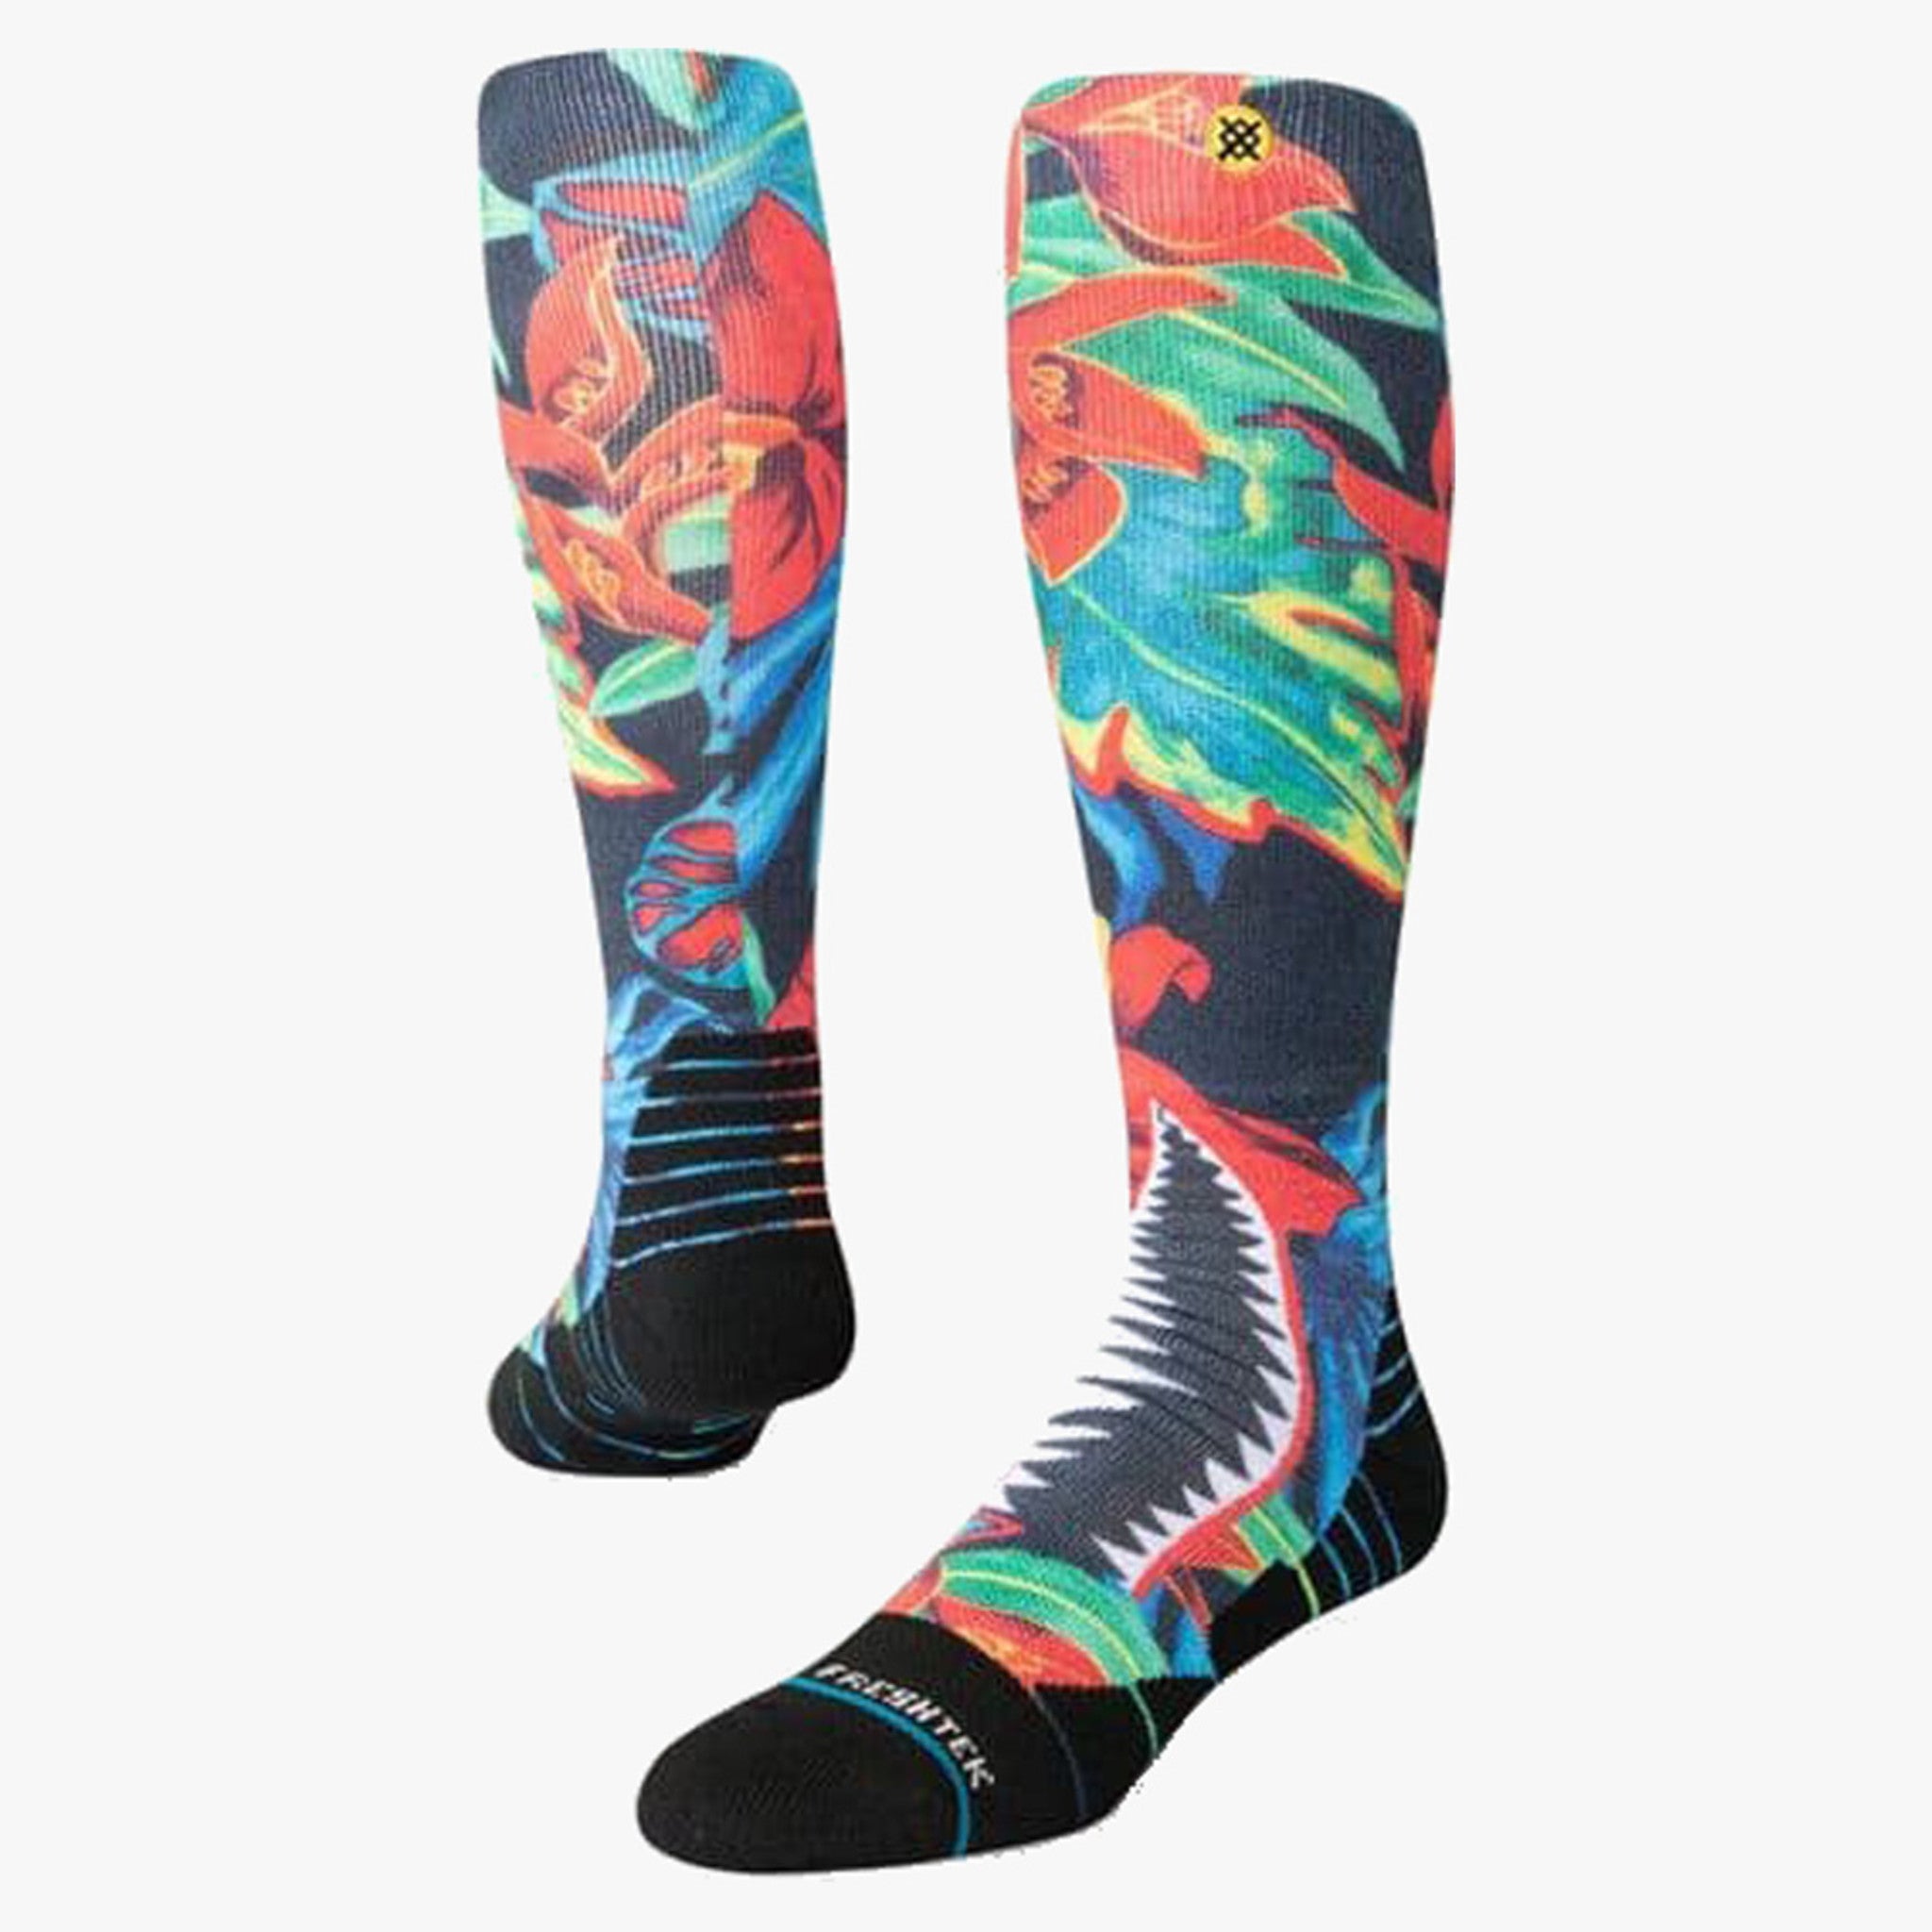 Stance Adventure Socks – Review